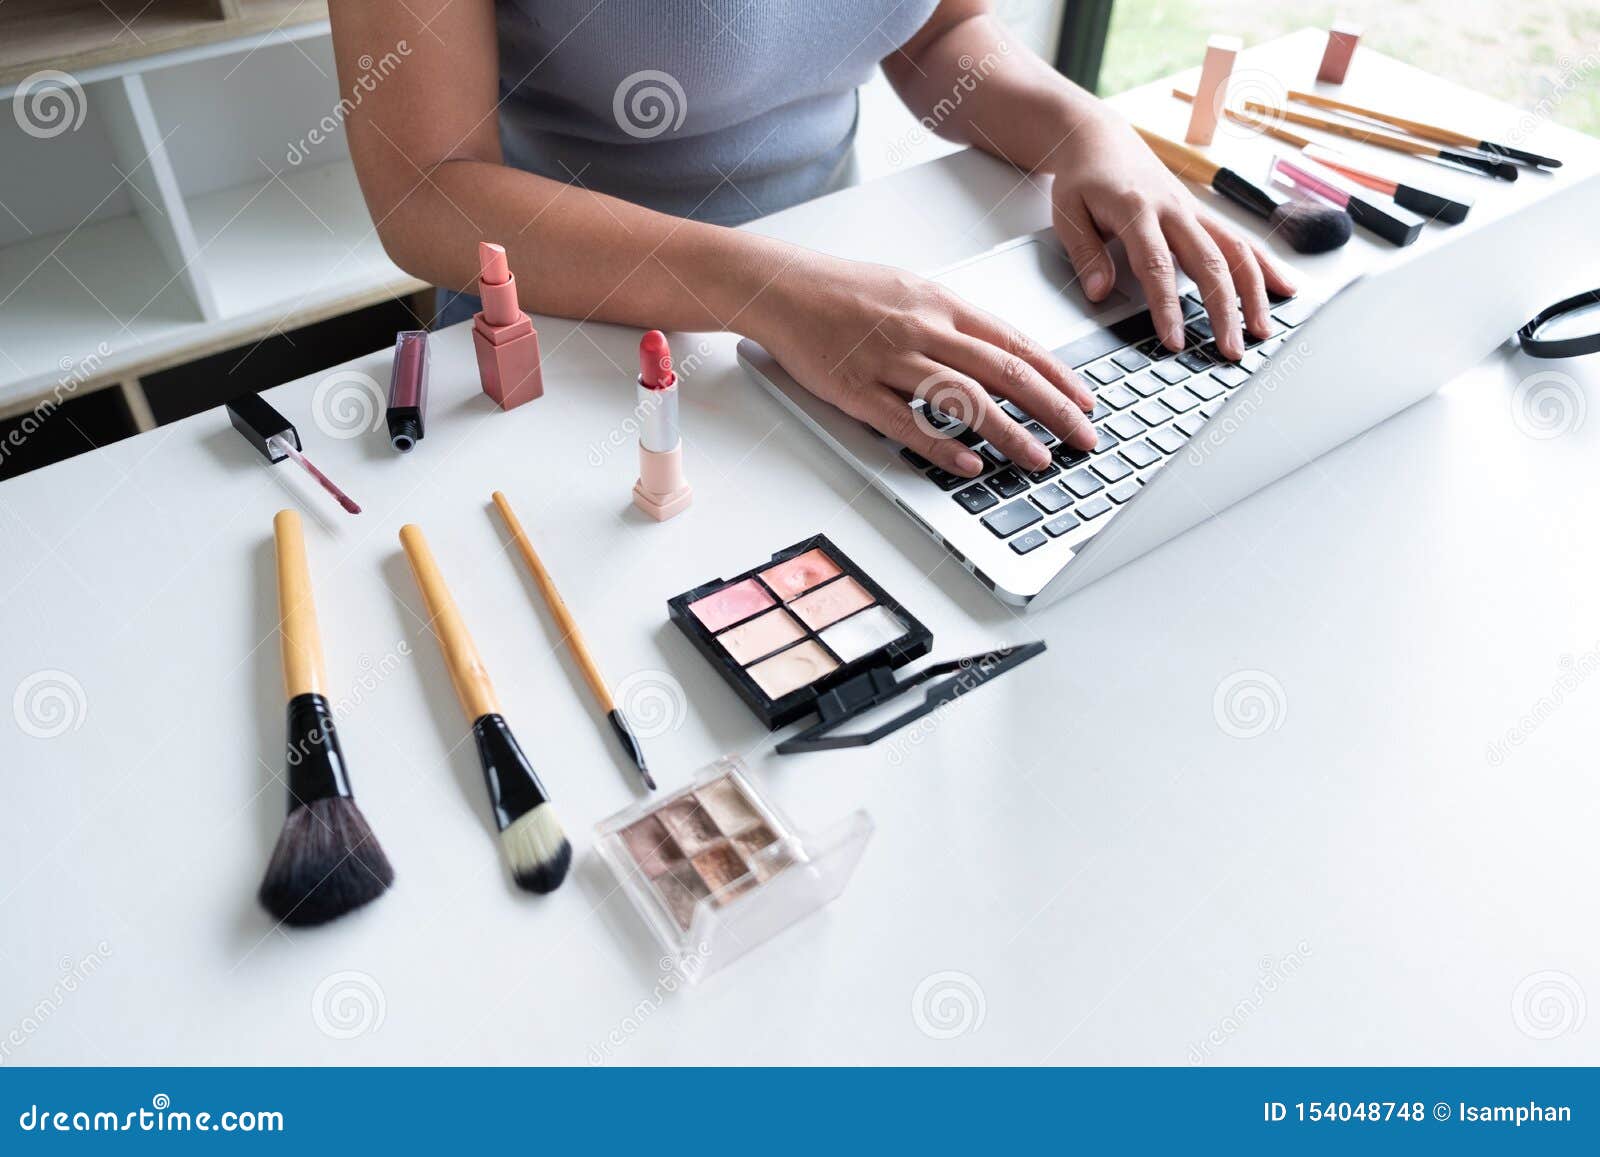 beauty blogger present beauty cosmetics sitting in front tablet. beautiful woman use cosmetics review make up for online